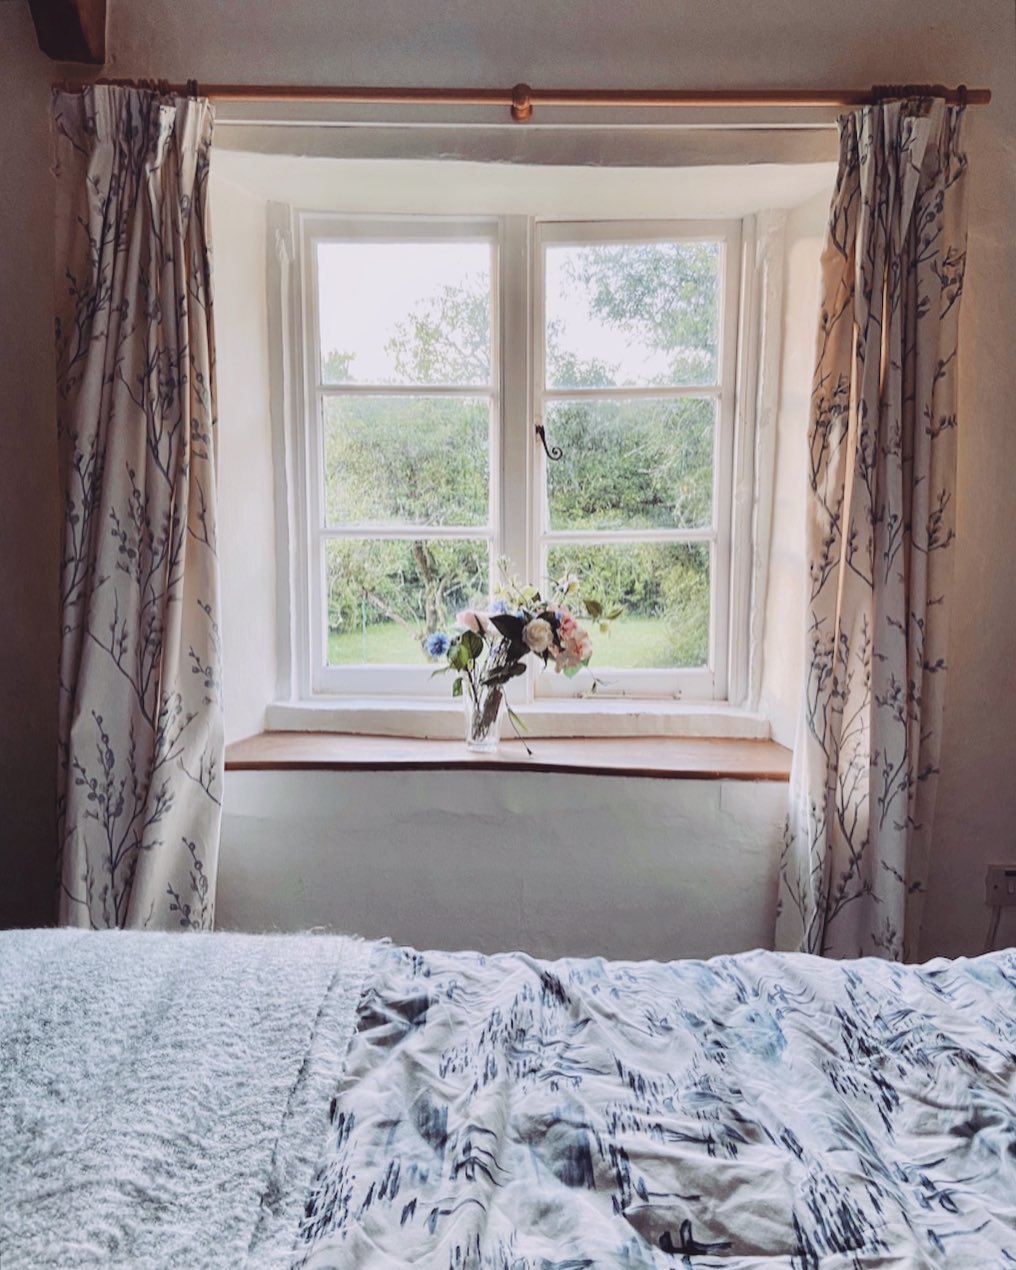 Cozy cottage bedroom with clean windows and flowers on windowsill. Photo by Instagram User @thesundayfeeling